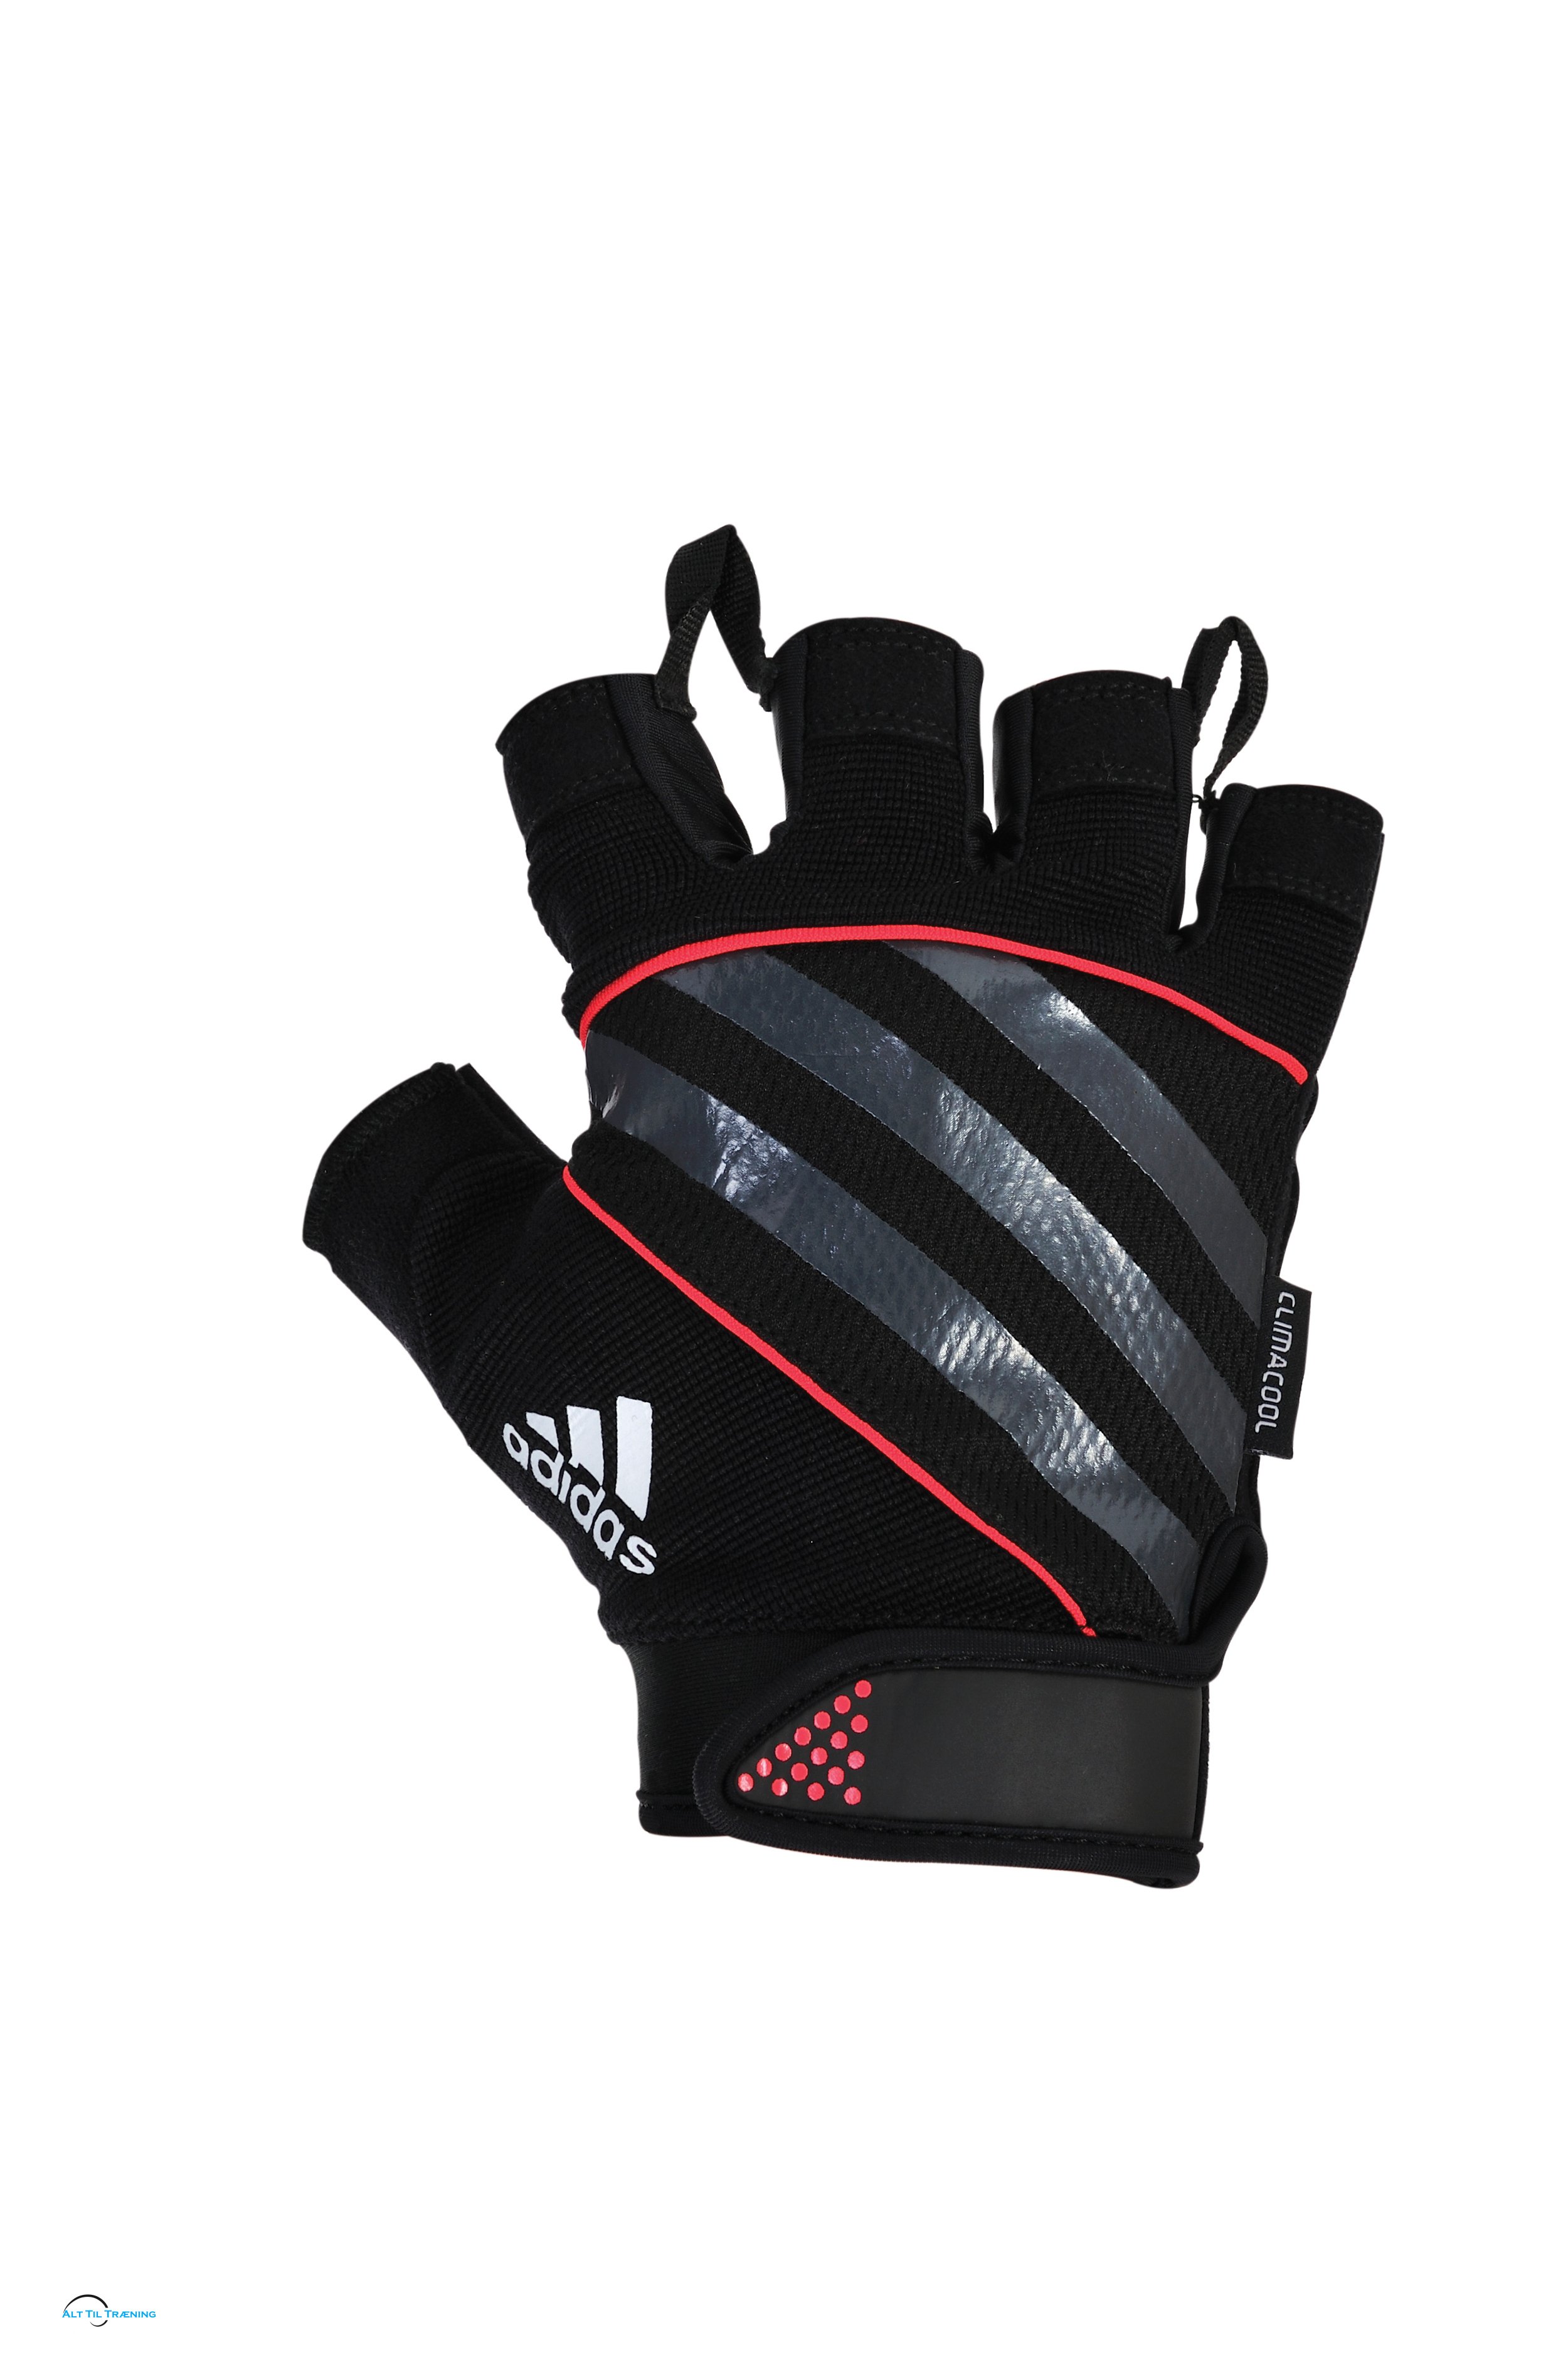 Adidas Gloves Sh. Fingered Performance, Red - Small